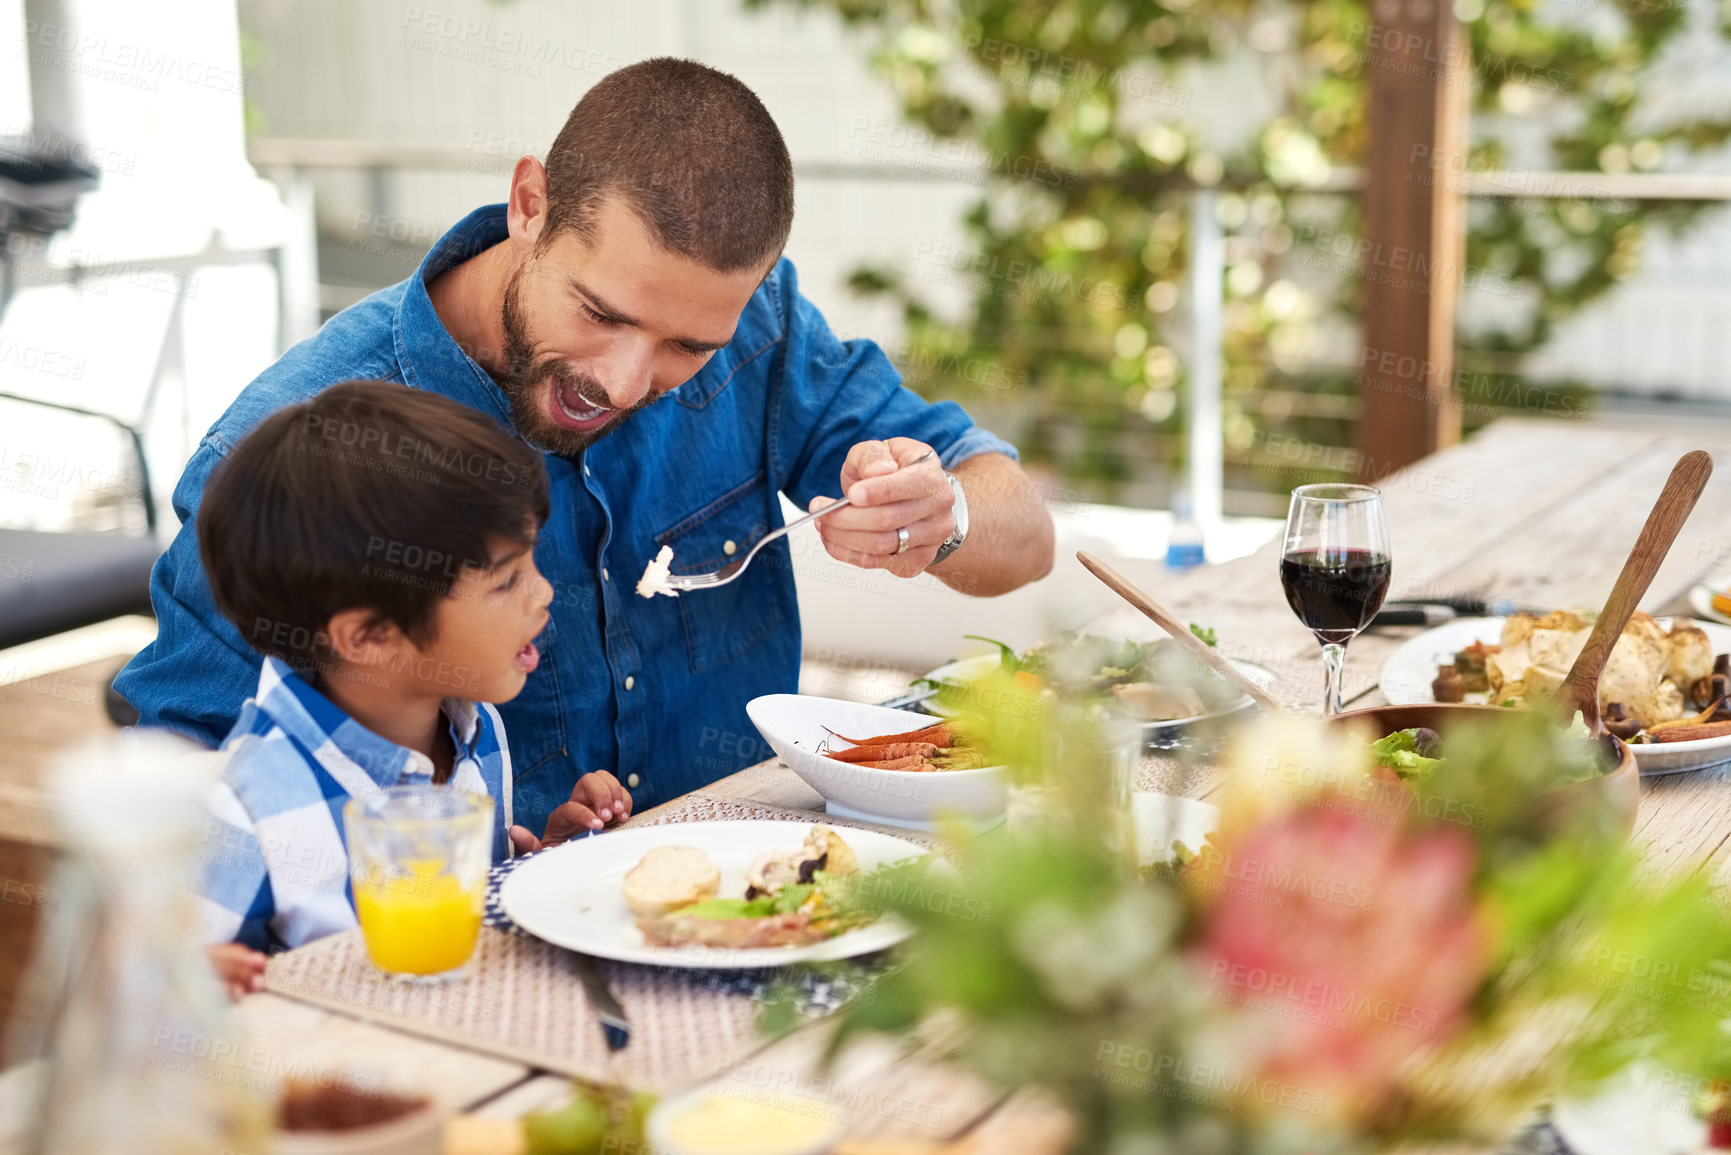 Buy stock photo Shot of a father feeding his young son while having a meal together outdoors